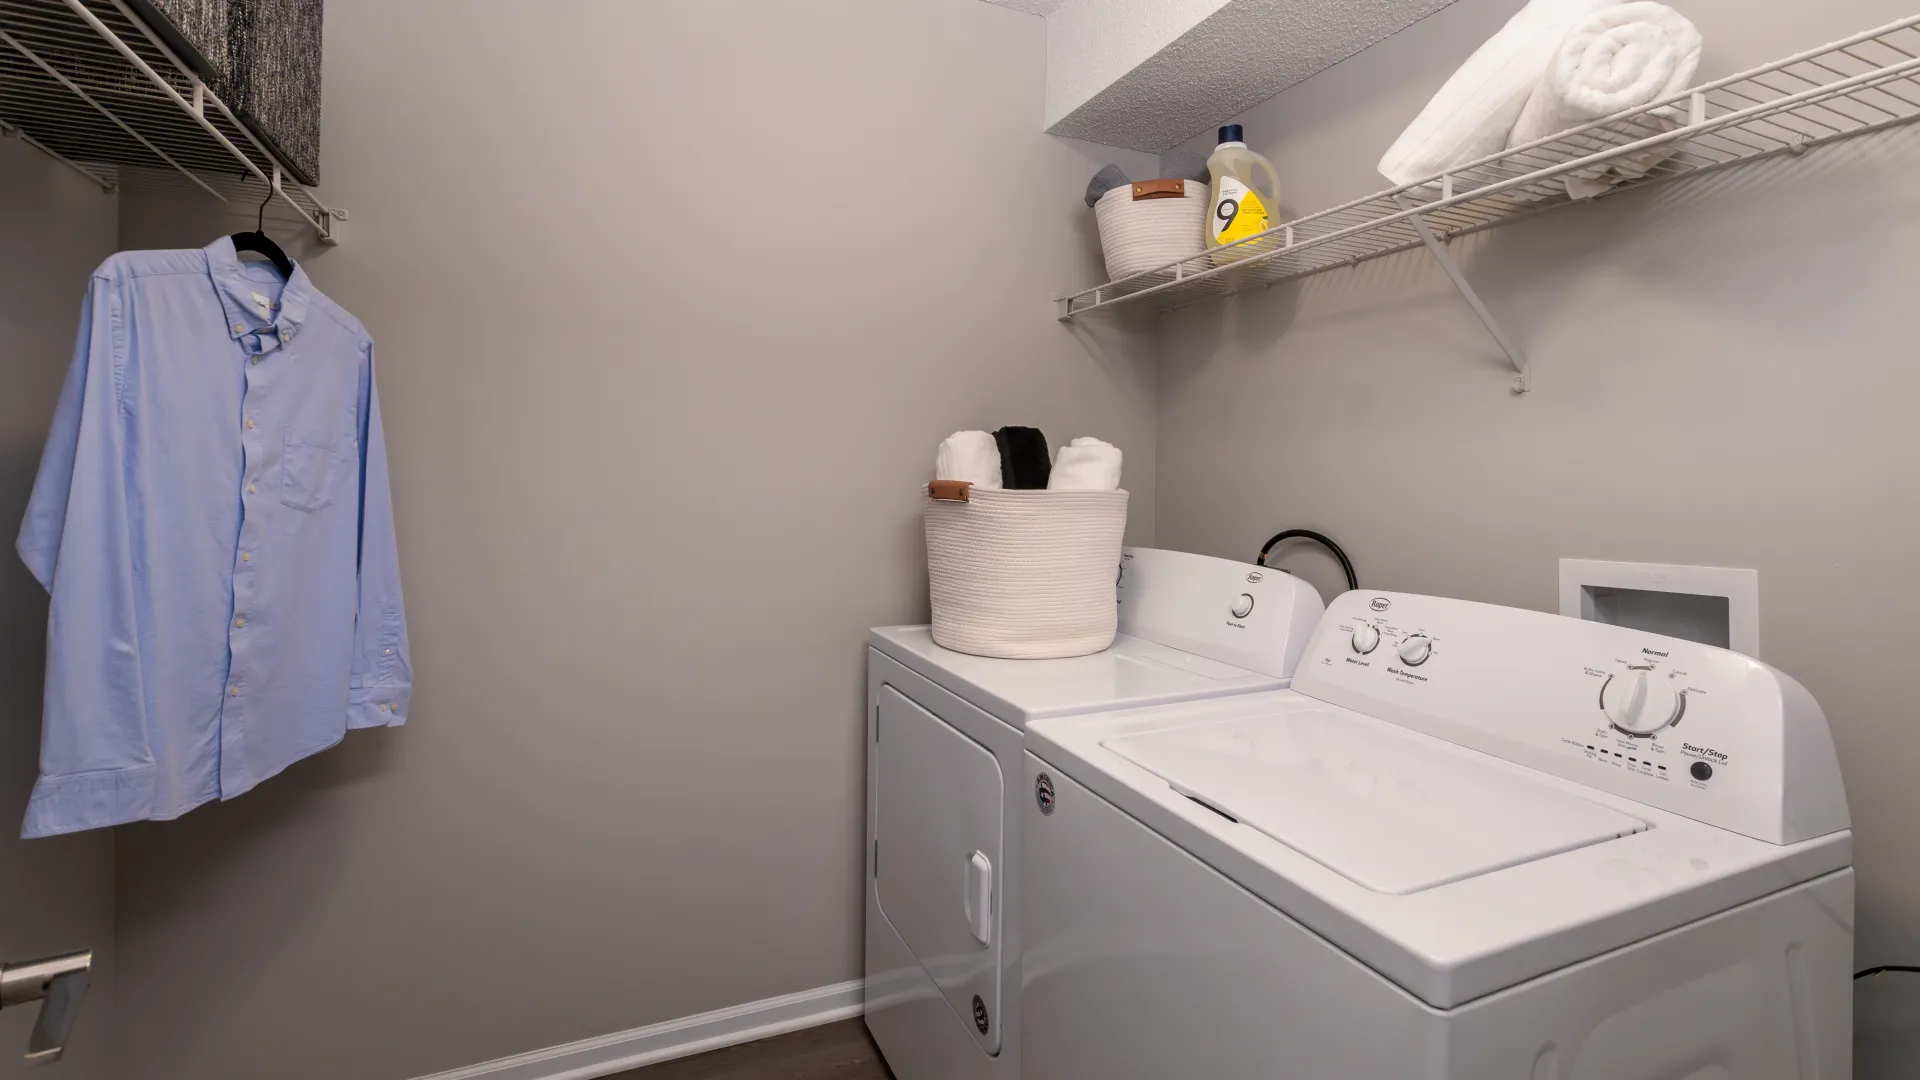 A laundry room with a washer, dryer, and shelving for storage and hanging clothes.